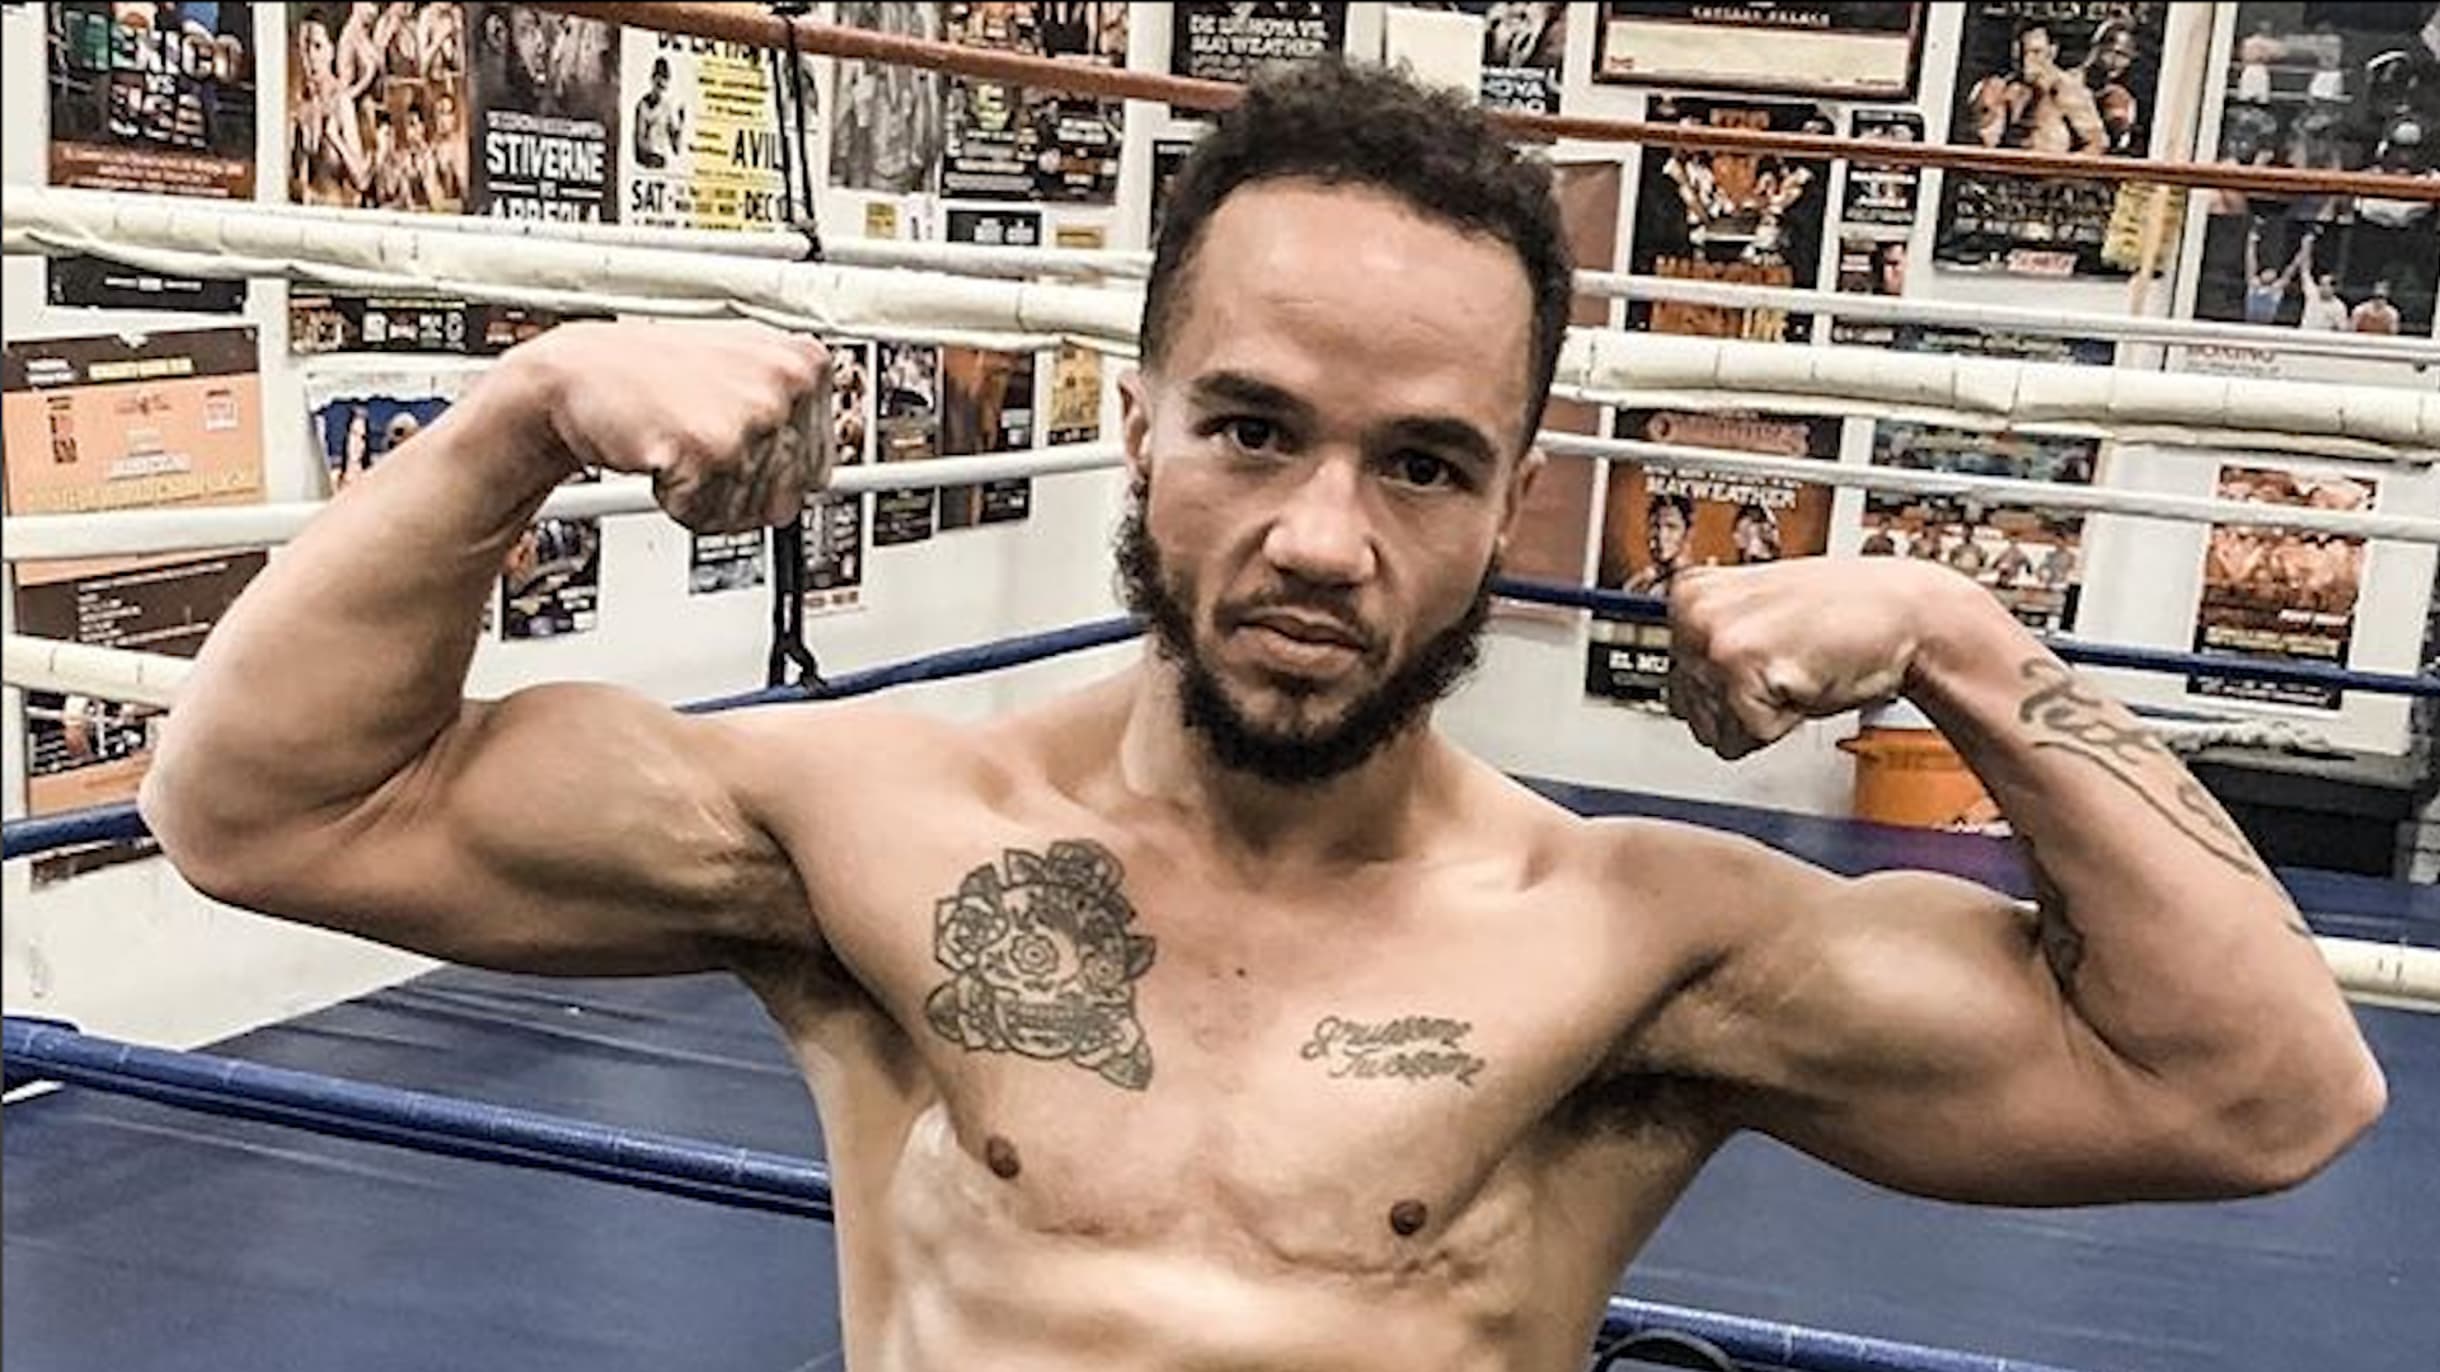 Transgender boxer Pat Manuel makes history with first professional picture